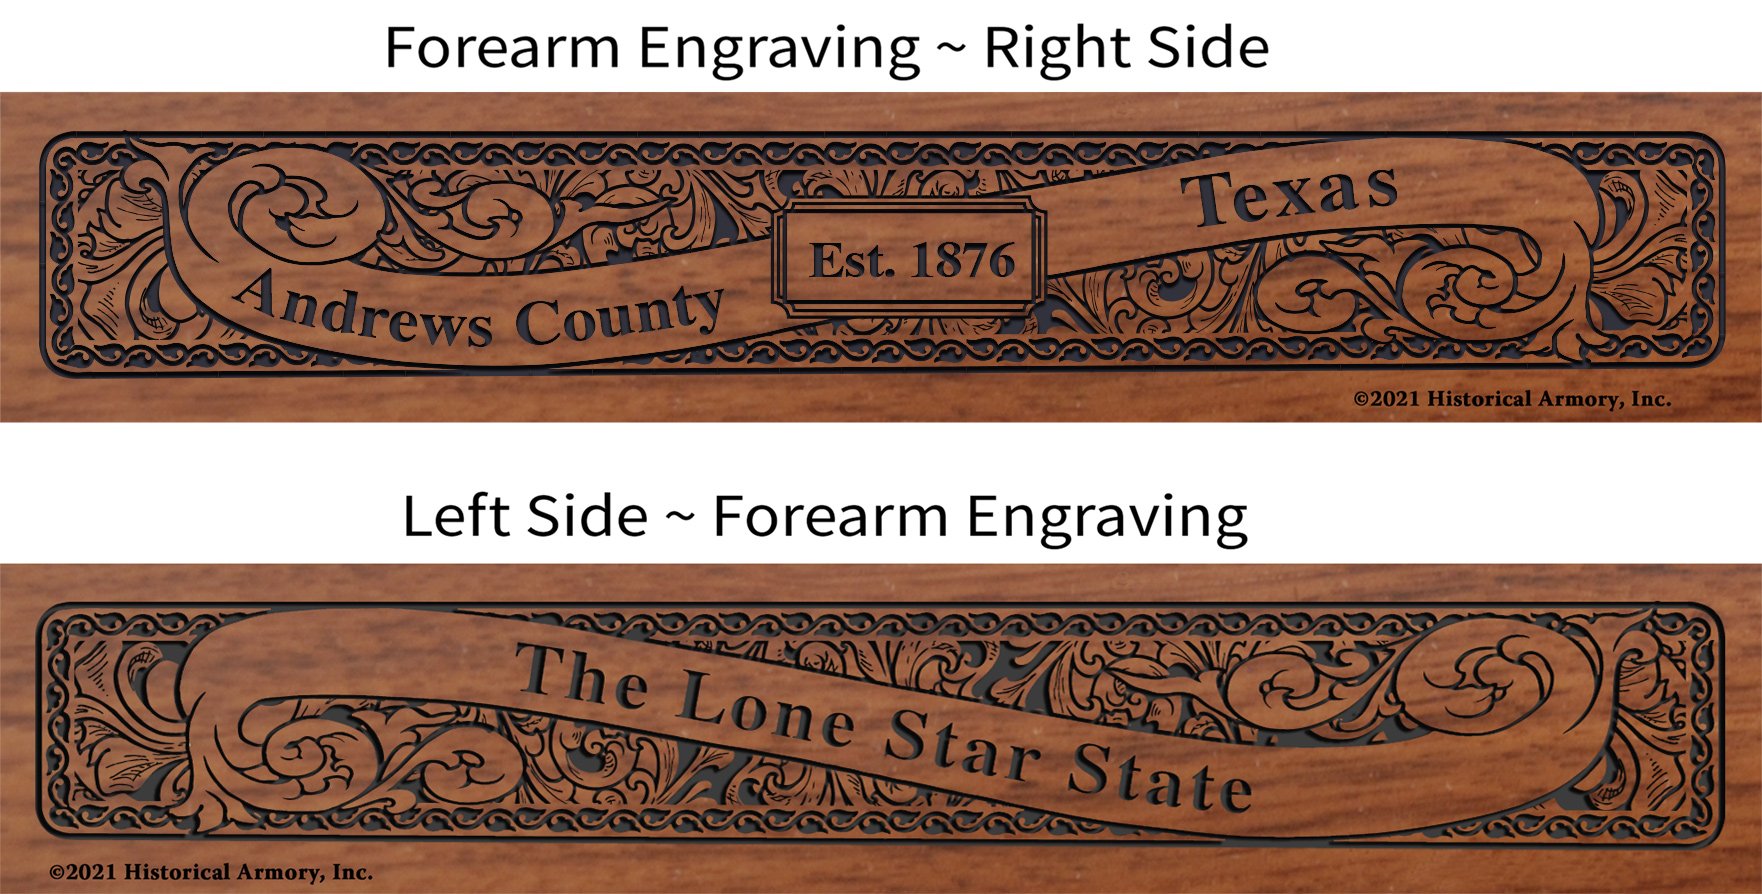 Andrews County Texas Establishment and Motto History Engraved Rifle Forearm